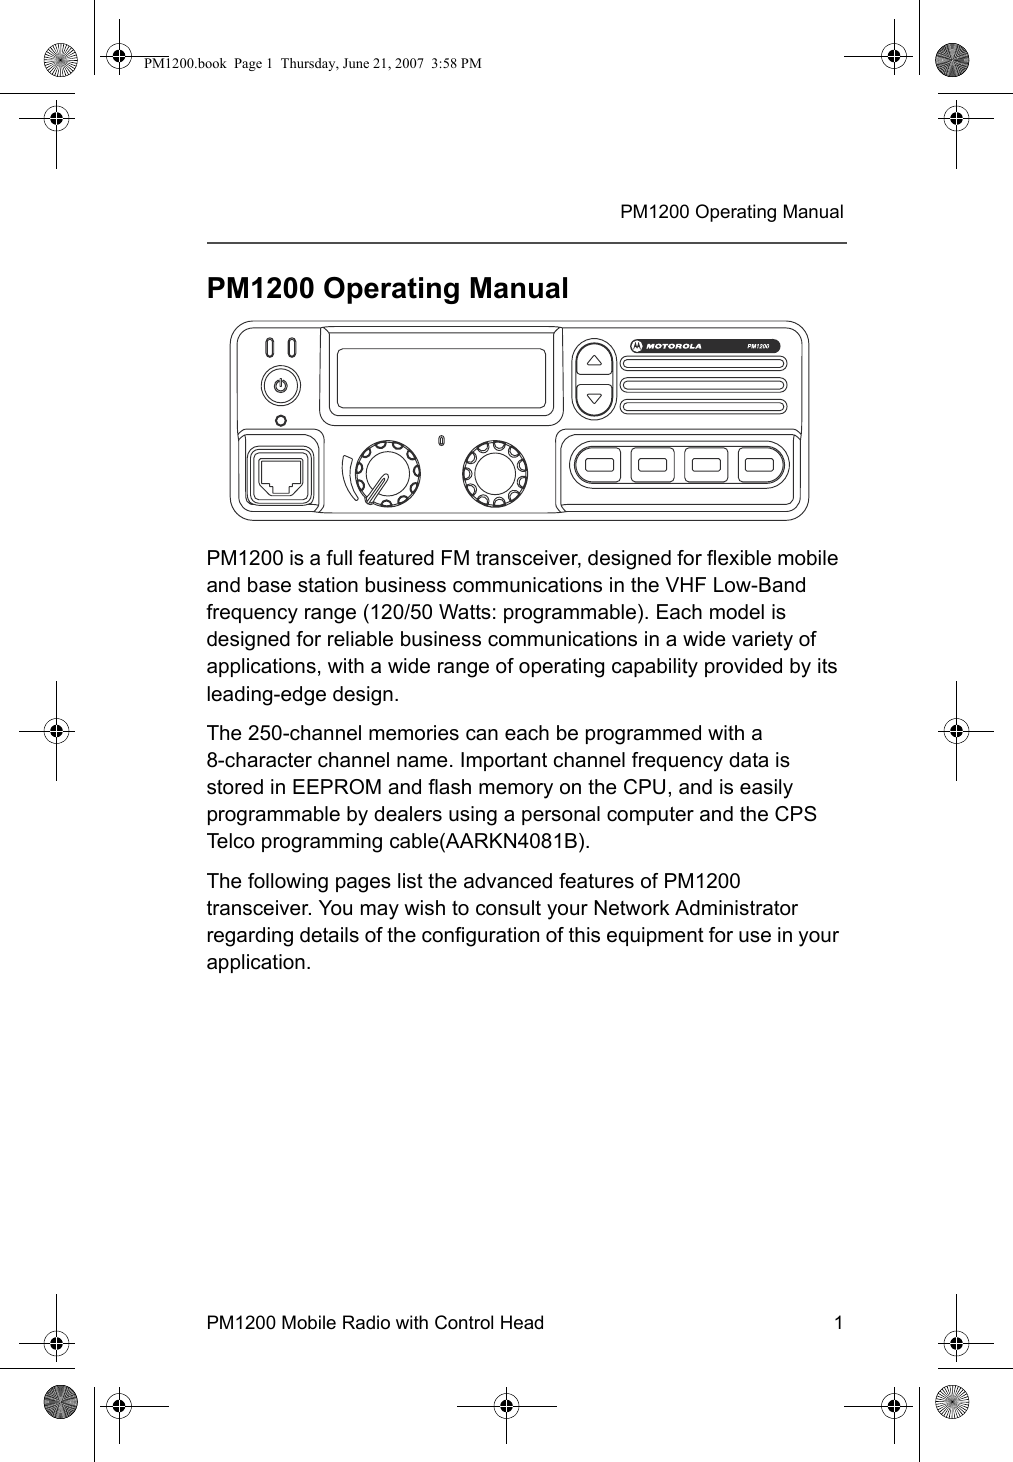 PM1200 Mobile Radio with Control Head 1PM1200 Operating ManualPM1200 Operating ManualPM1200 is a full featured FM transceiver, designed for flexible mobile and base station business communications in the VHF Low-Band frequency range (120/50 Watts: programmable). Each model is designed for reliable business communications in a wide variety of applications, with a wide range of operating capability provided by its leading-edge design.The 250-channel memories can each be programmed with a             8-character channel name. Important channel frequency data is stored in EEPROM and flash memory on the CPU, and is easily programmable by dealers using a personal computer and the CPS Telco programming cable(AARKN4081B).The following pages list the advanced features of PM1200 transceiver. You may wish to consult your Network Administrator regarding details of the configuration of this equipment for use in your application.PM1200.book  Page 1  Thursday, June 21, 2007  3:58 PM